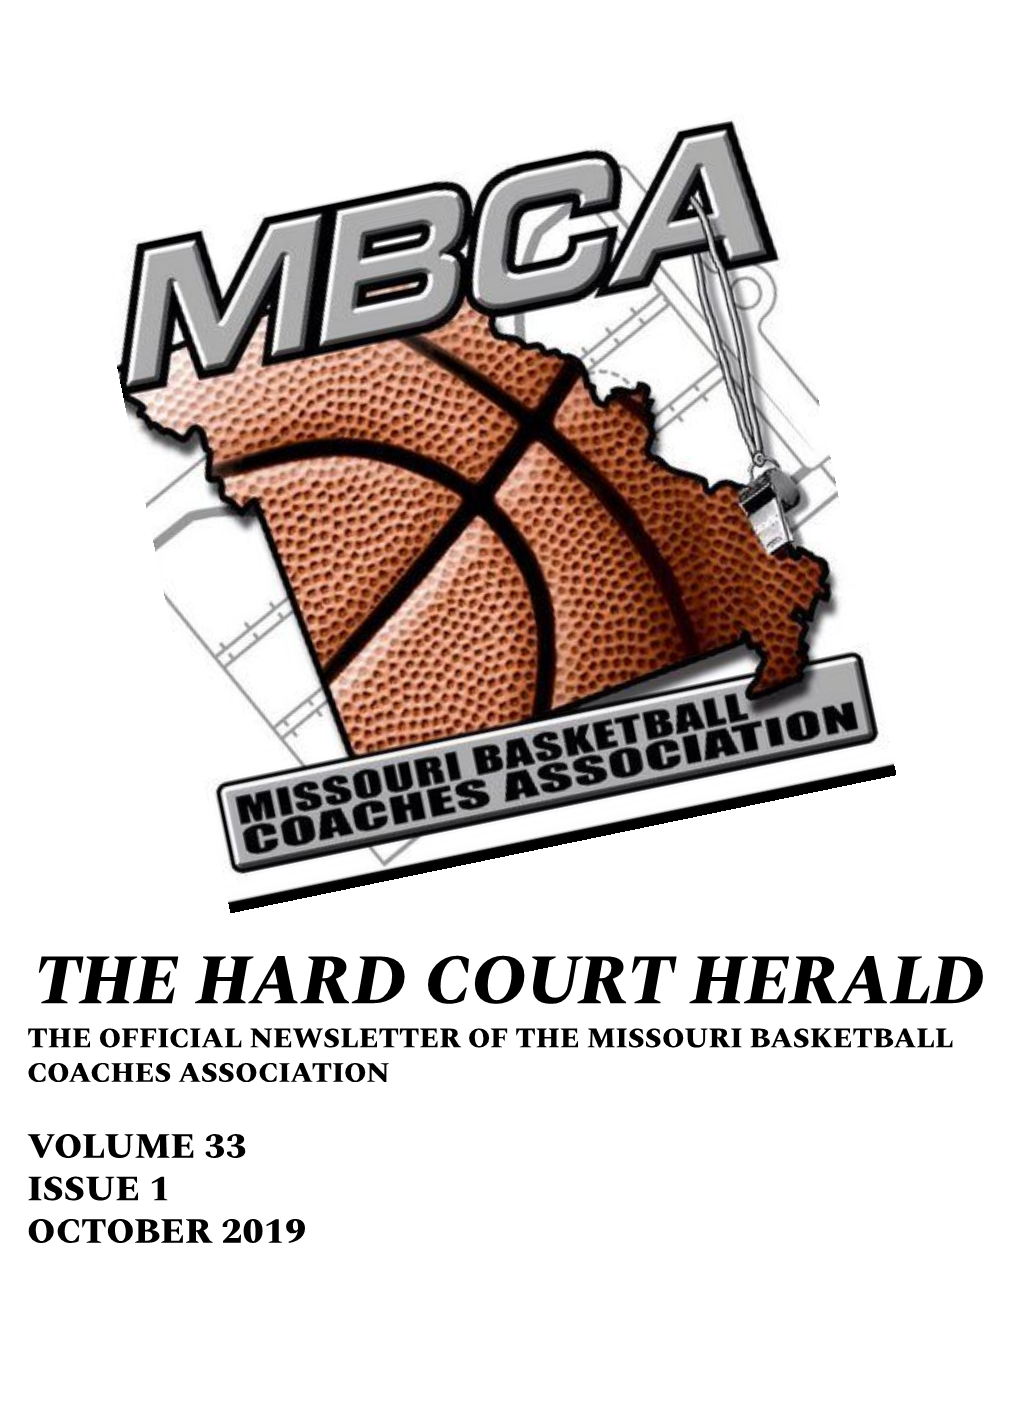 The Hard Court Herald the Official Newsletter of the Missouri Basketball Coaches Association